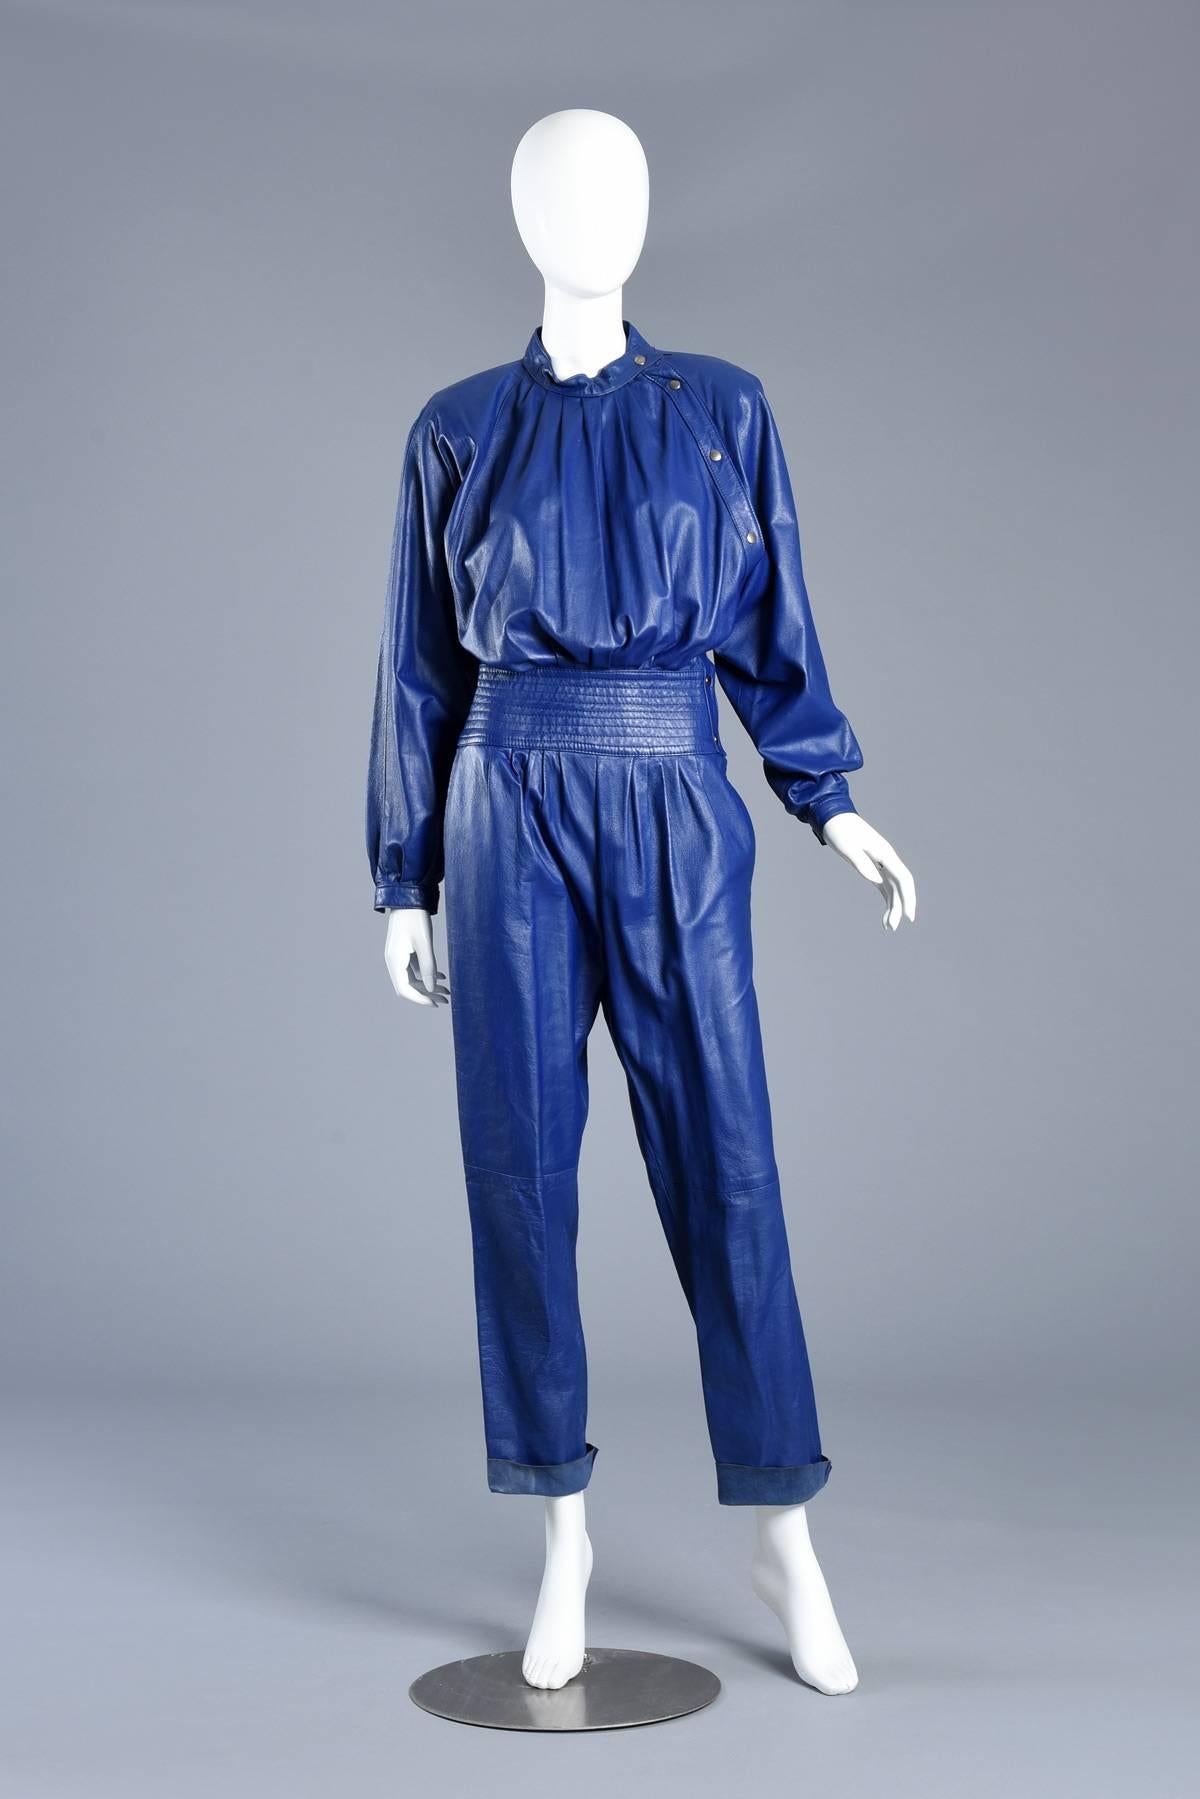 Super great 1980s leather jumpsuit in a rare indigo color. It's so hard to find leather jumpsuits and when we do they are more often than not a classic black. 

This piece features a high gathered neck and bust with asymmetric snap closures,